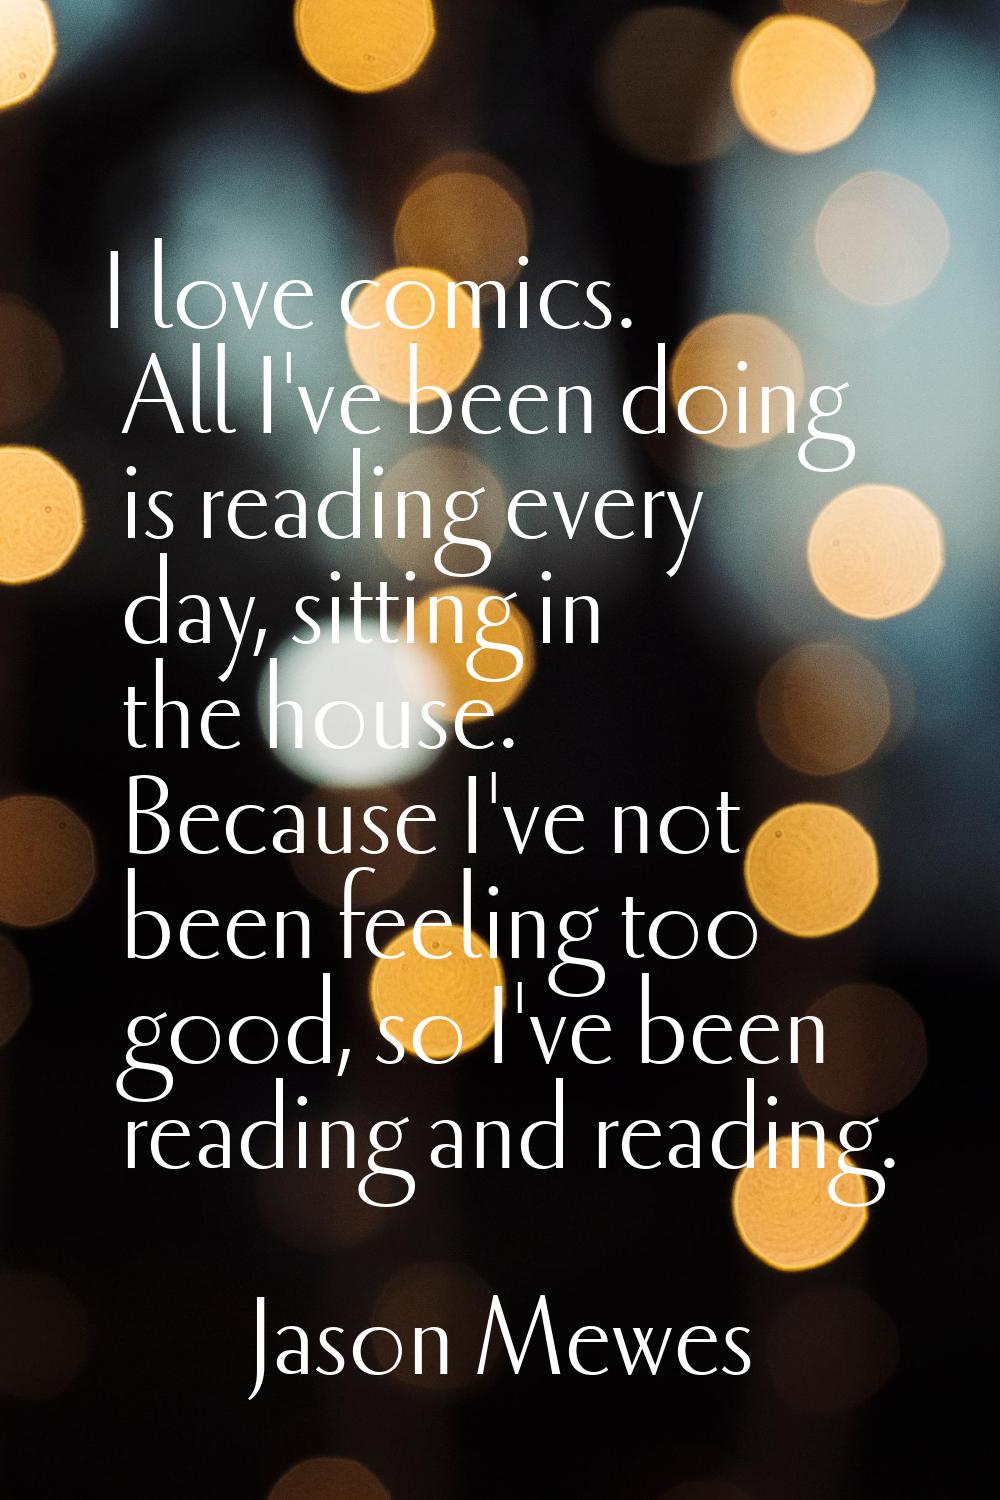 I love comics. All I've been doing is reading every day, sitting in the house. Because I've not bee